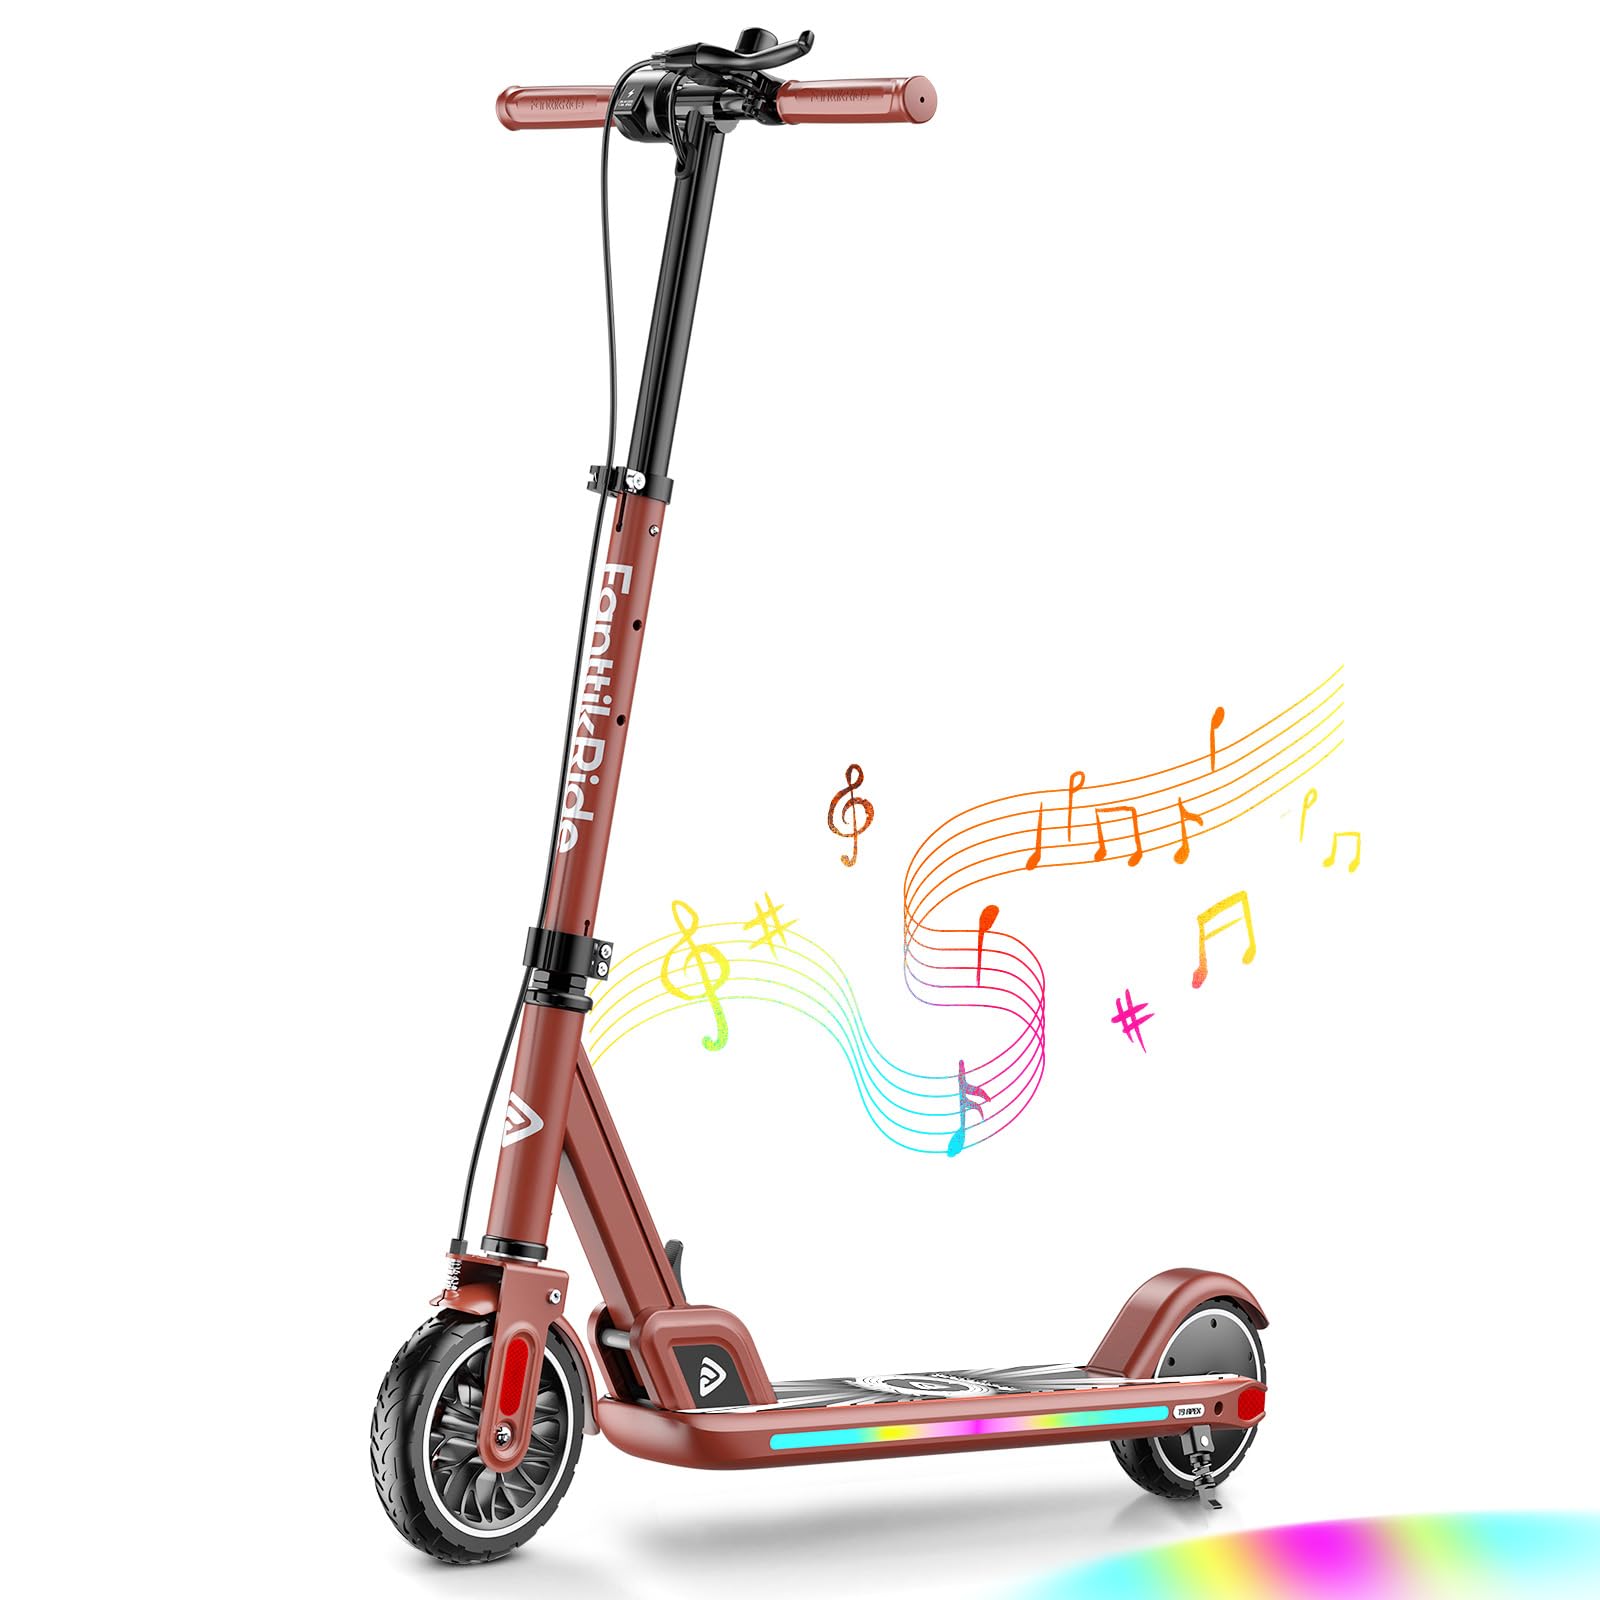 FanttikRide T9 Apex Electric Scooter for Teens Antique Red